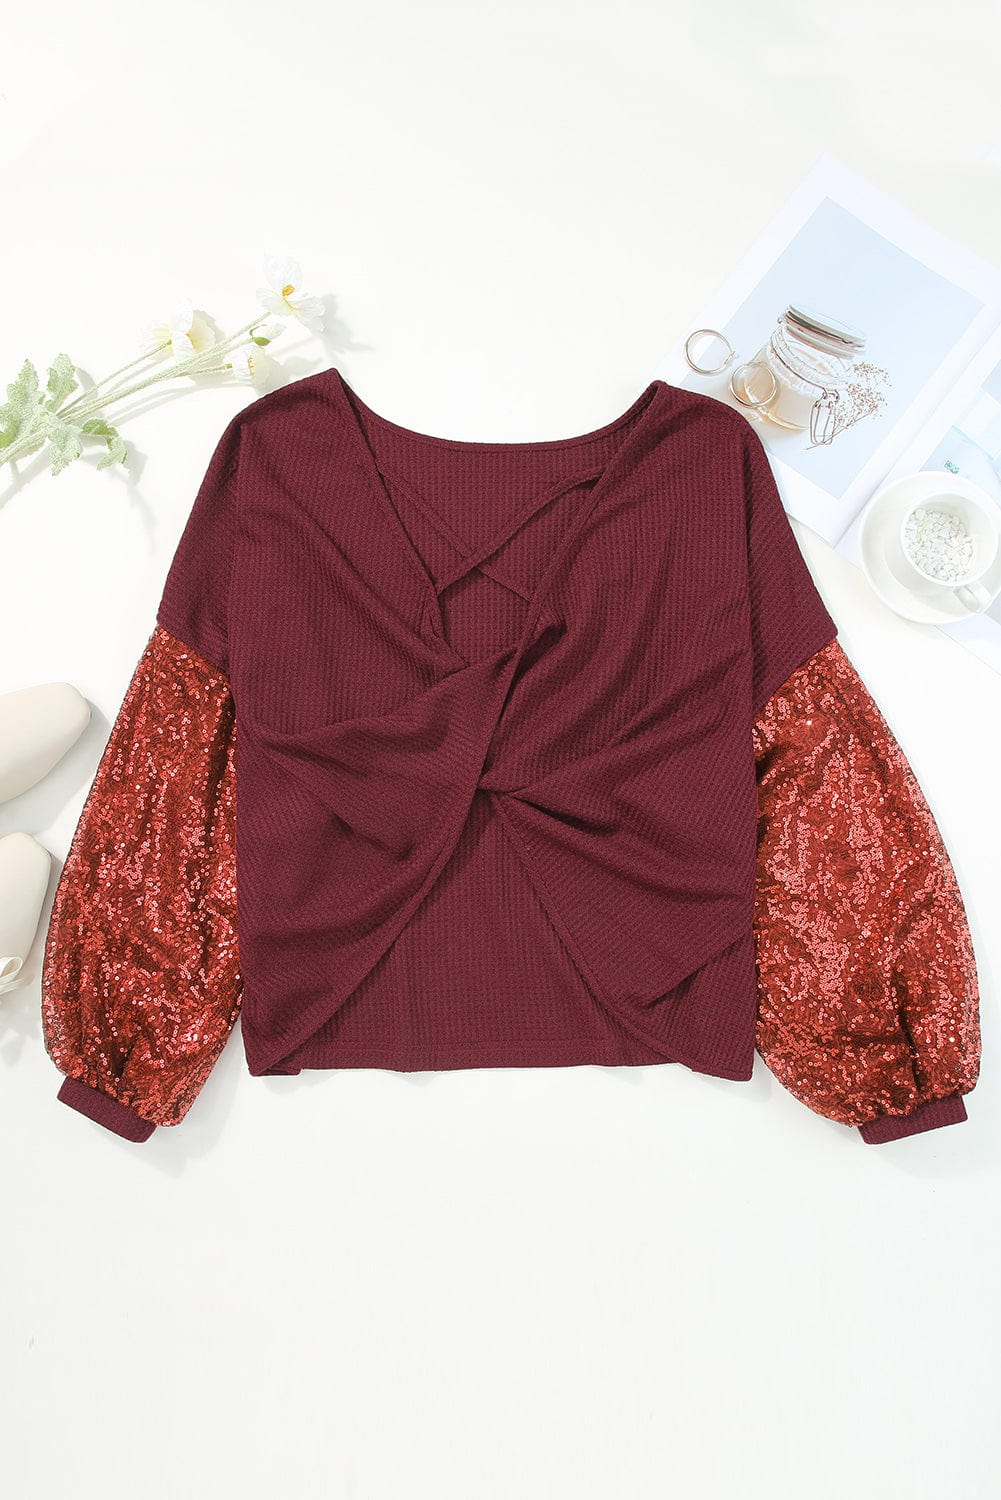 The802Gypsy  shirts and tops TRAVELING GYPSY- Open Back Sequin Sleeve Detail Blouse